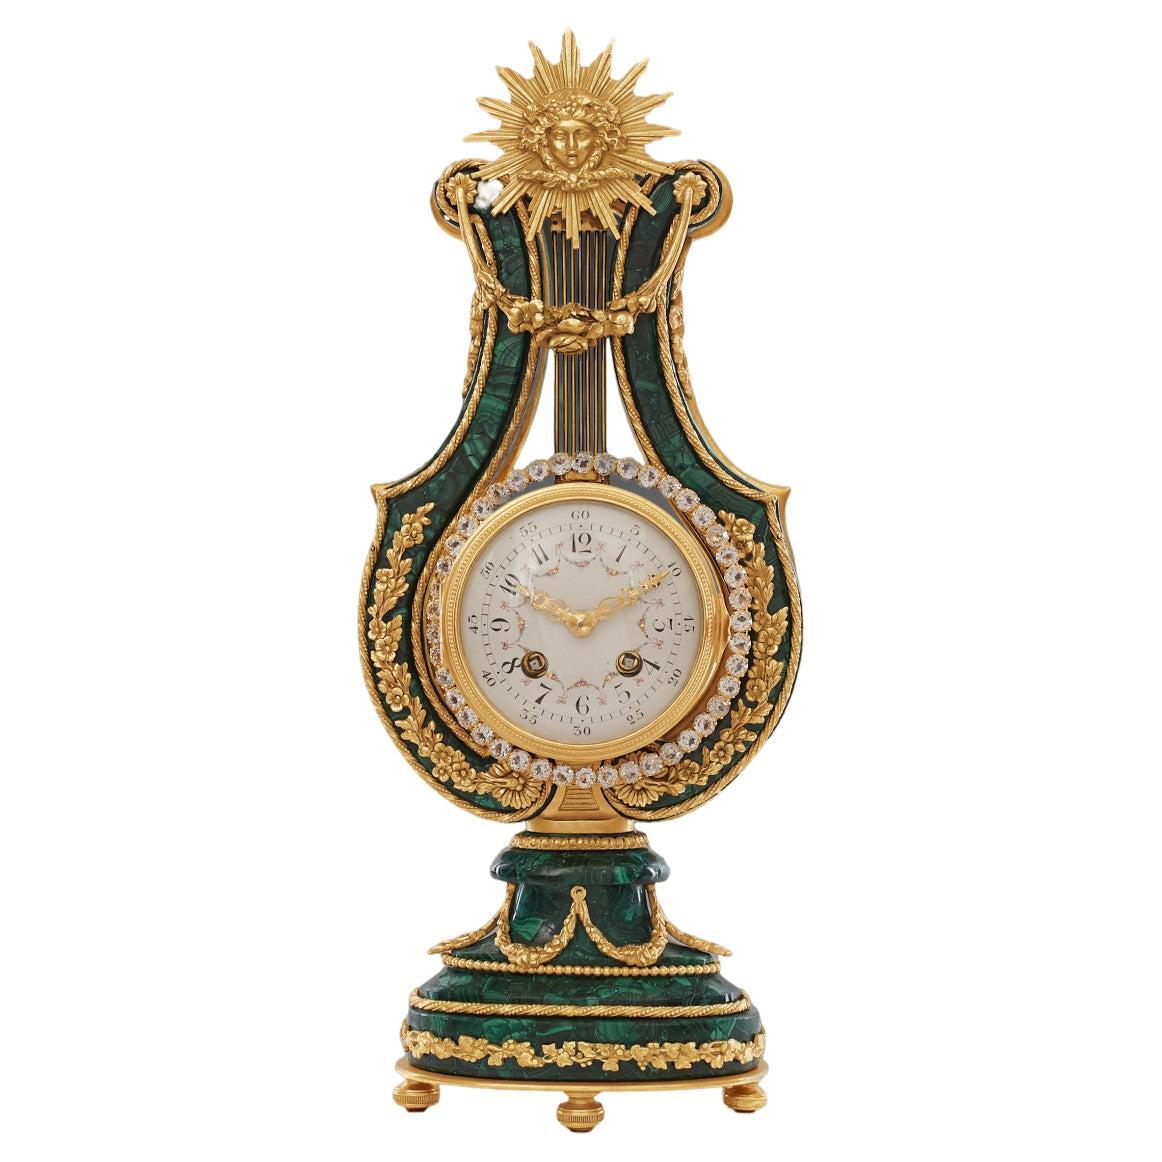 A of mantel clock in the style of Louis XVI, the 19th century.